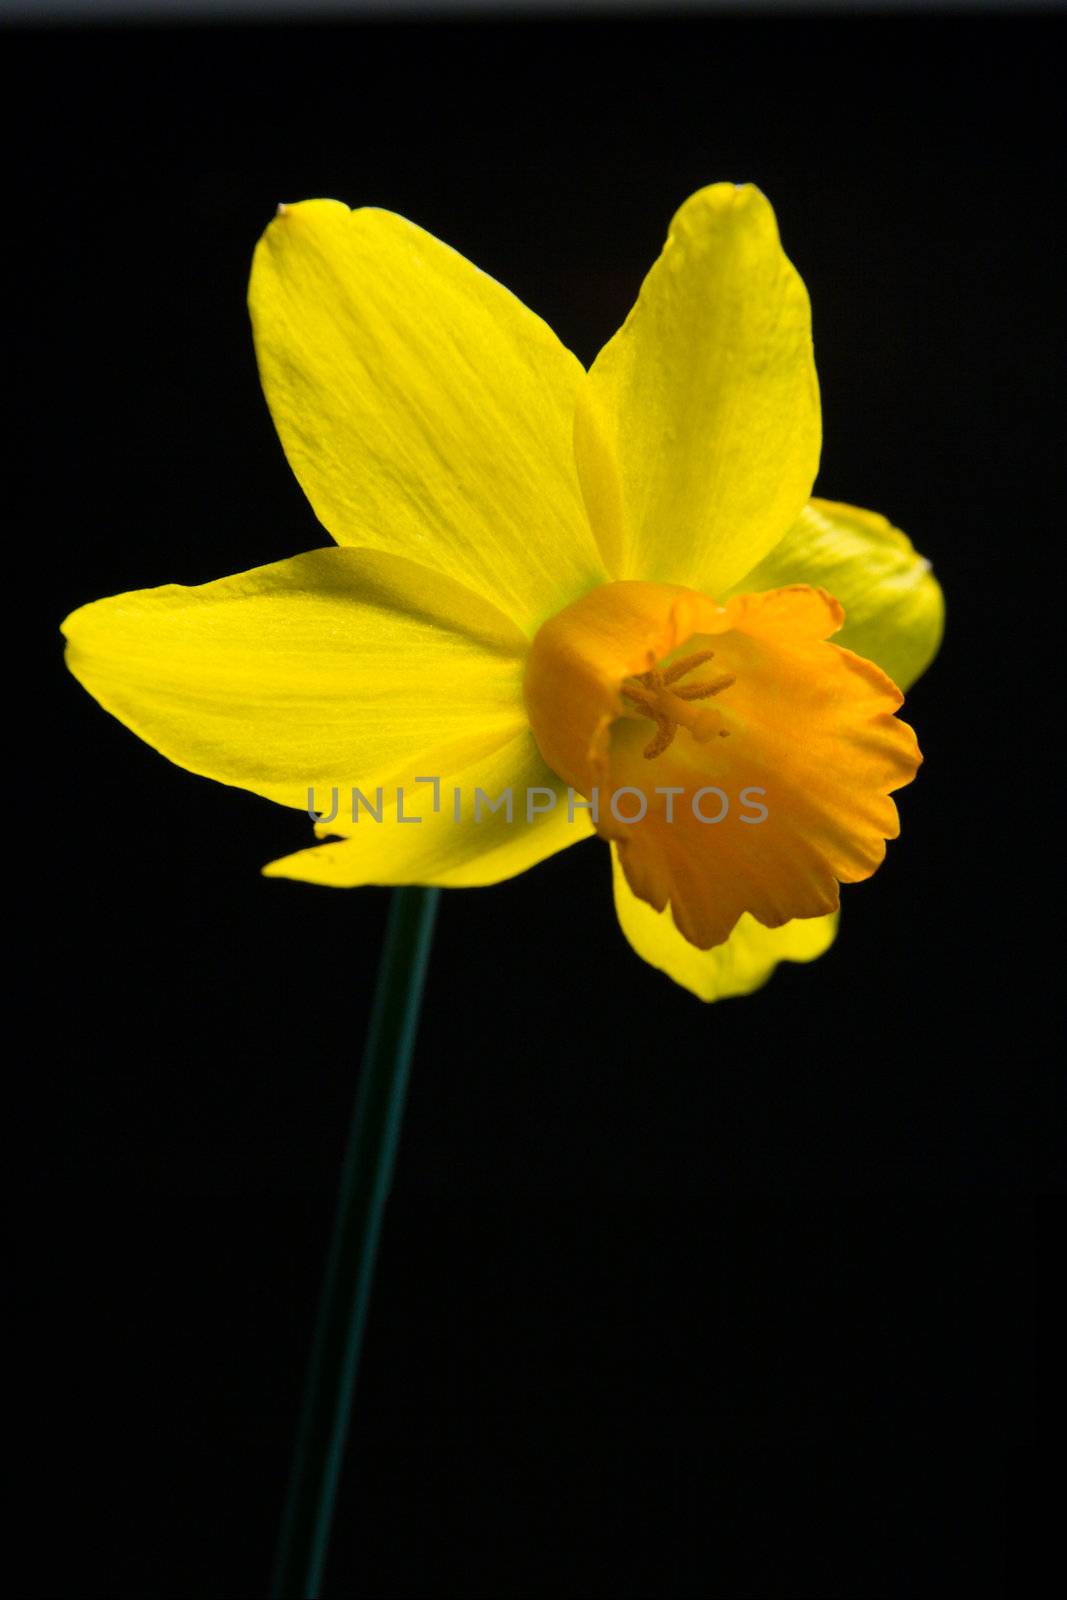 Single yellow daffodil with stem on black background